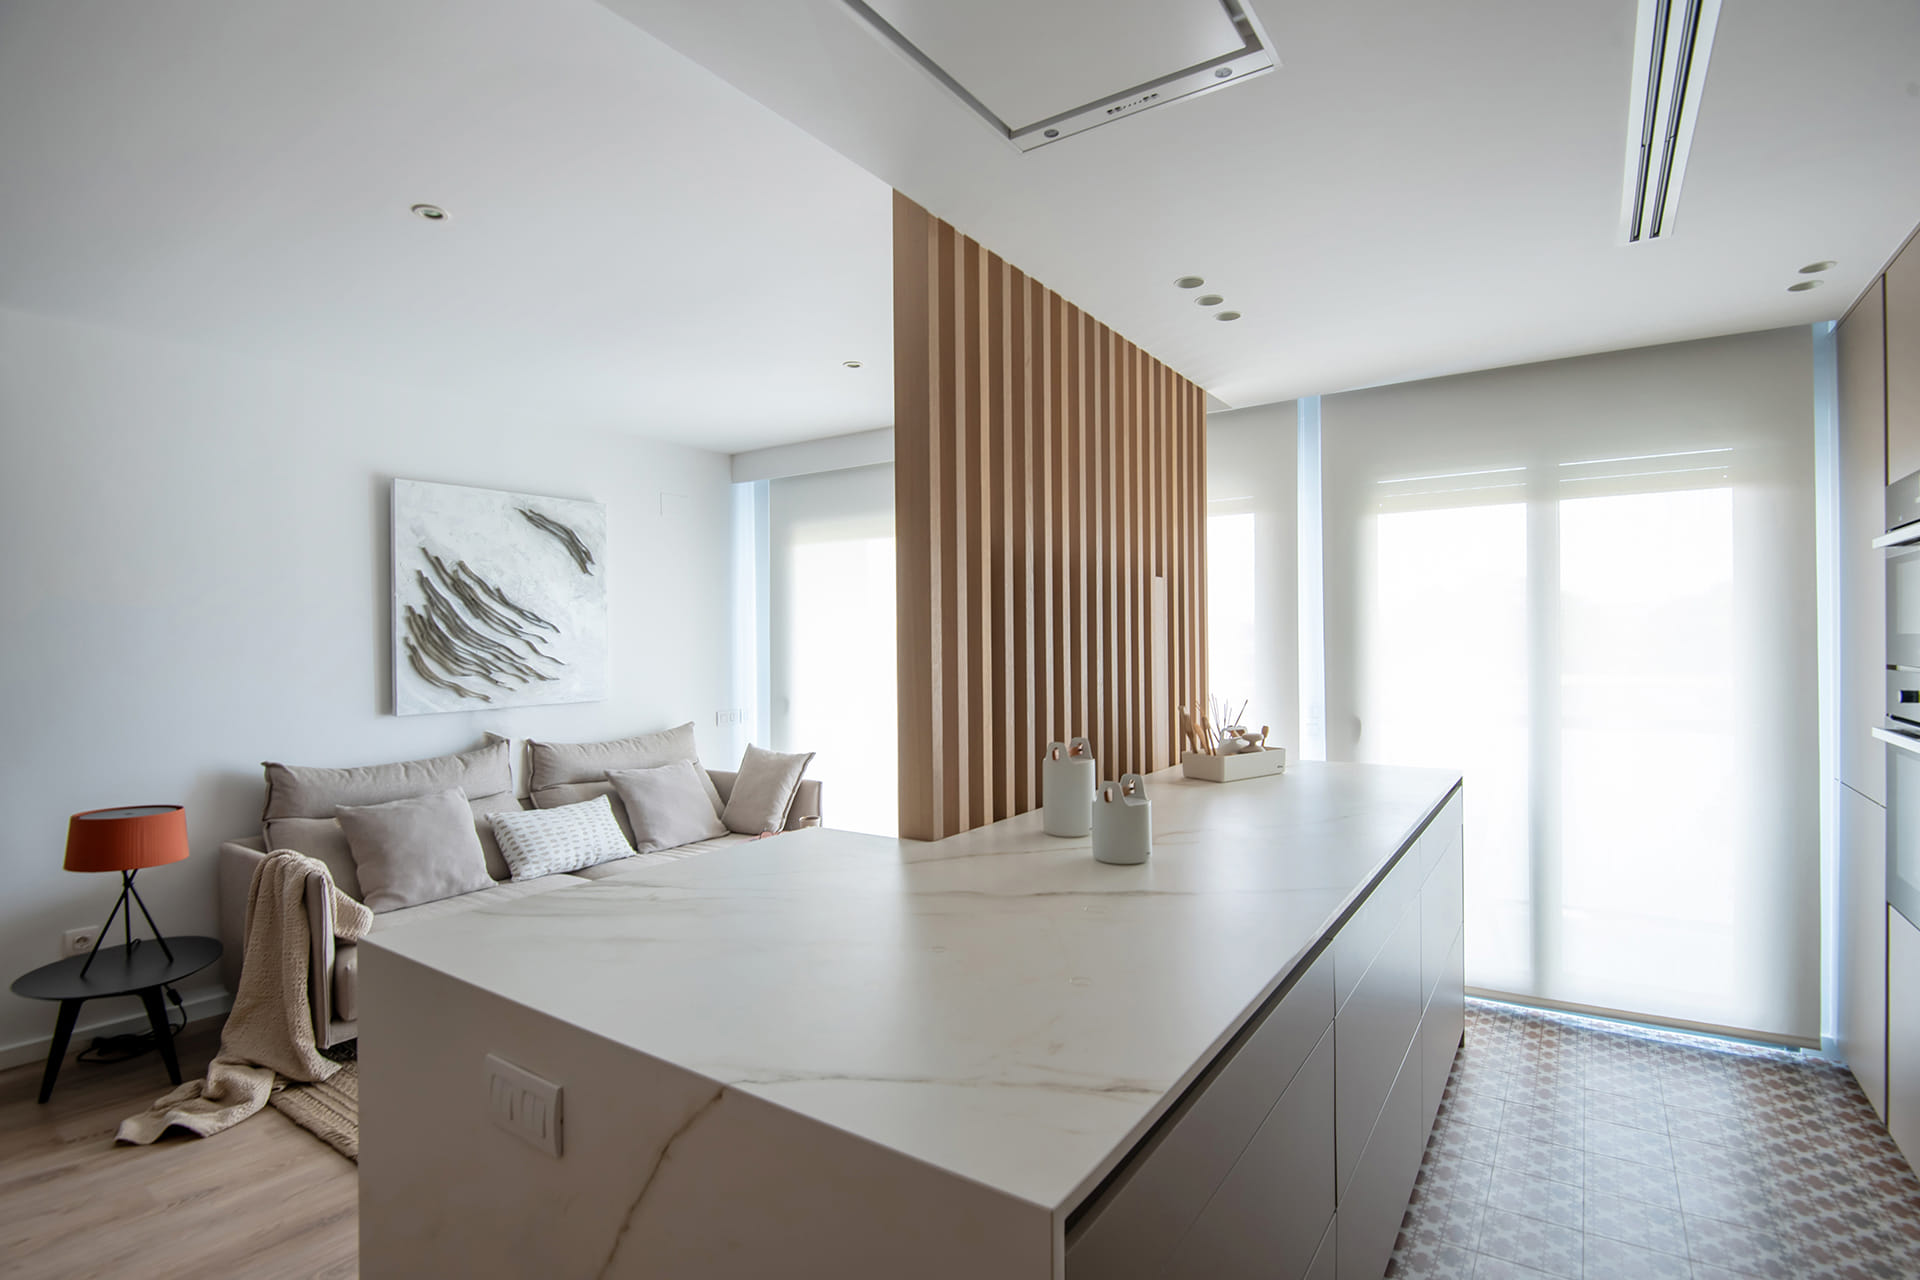 Kitchen island with integrated slats to separate it from the living room.